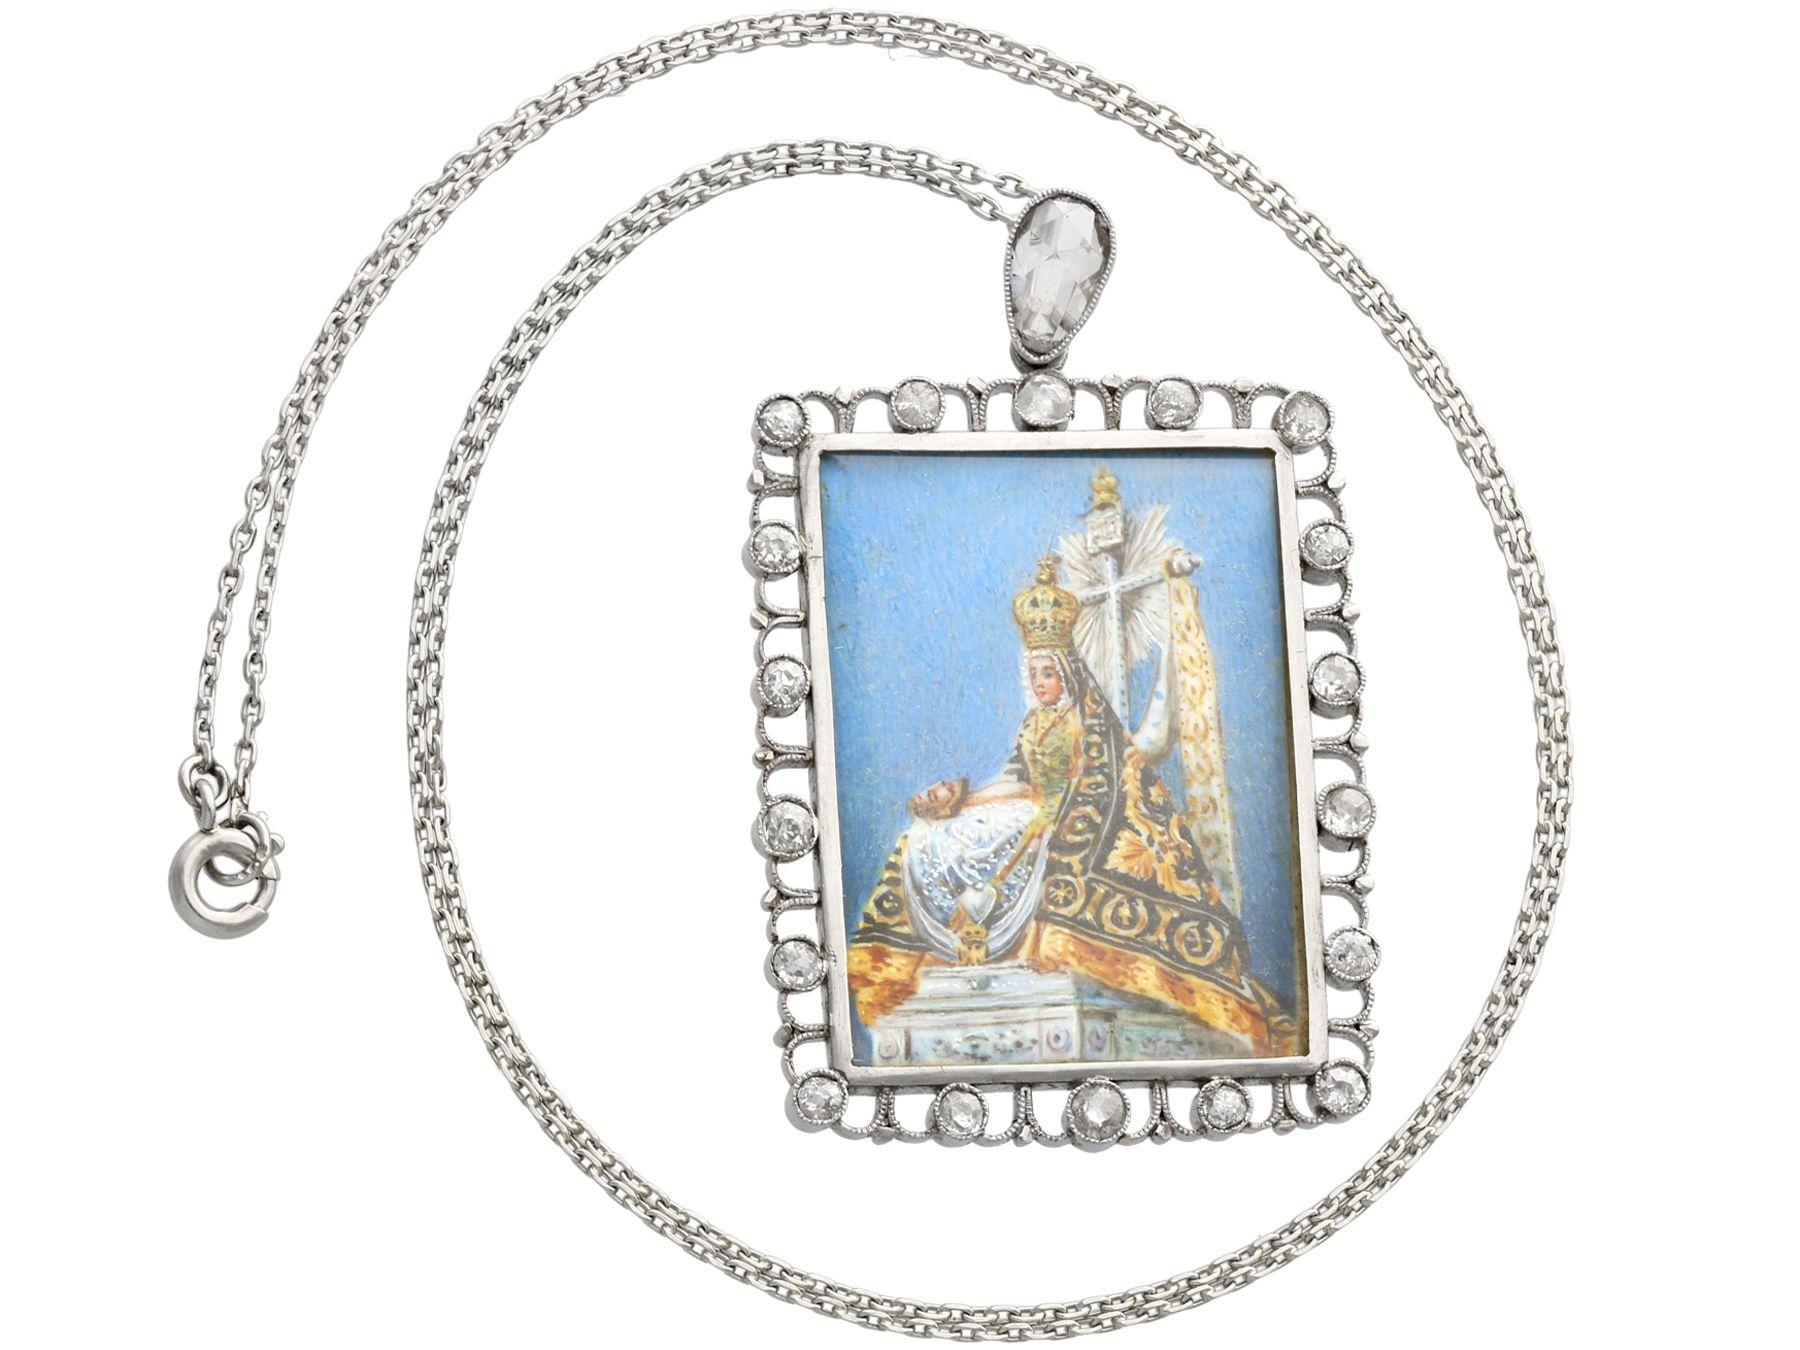 A fine and impressive antique hand painted enamel and 1.28Ct diamond platinum miniature portrait pendant; part of our diverse antique jewelry and estate jewelry collections.

This exceptional, fine and impressive antique diamond pendant has been